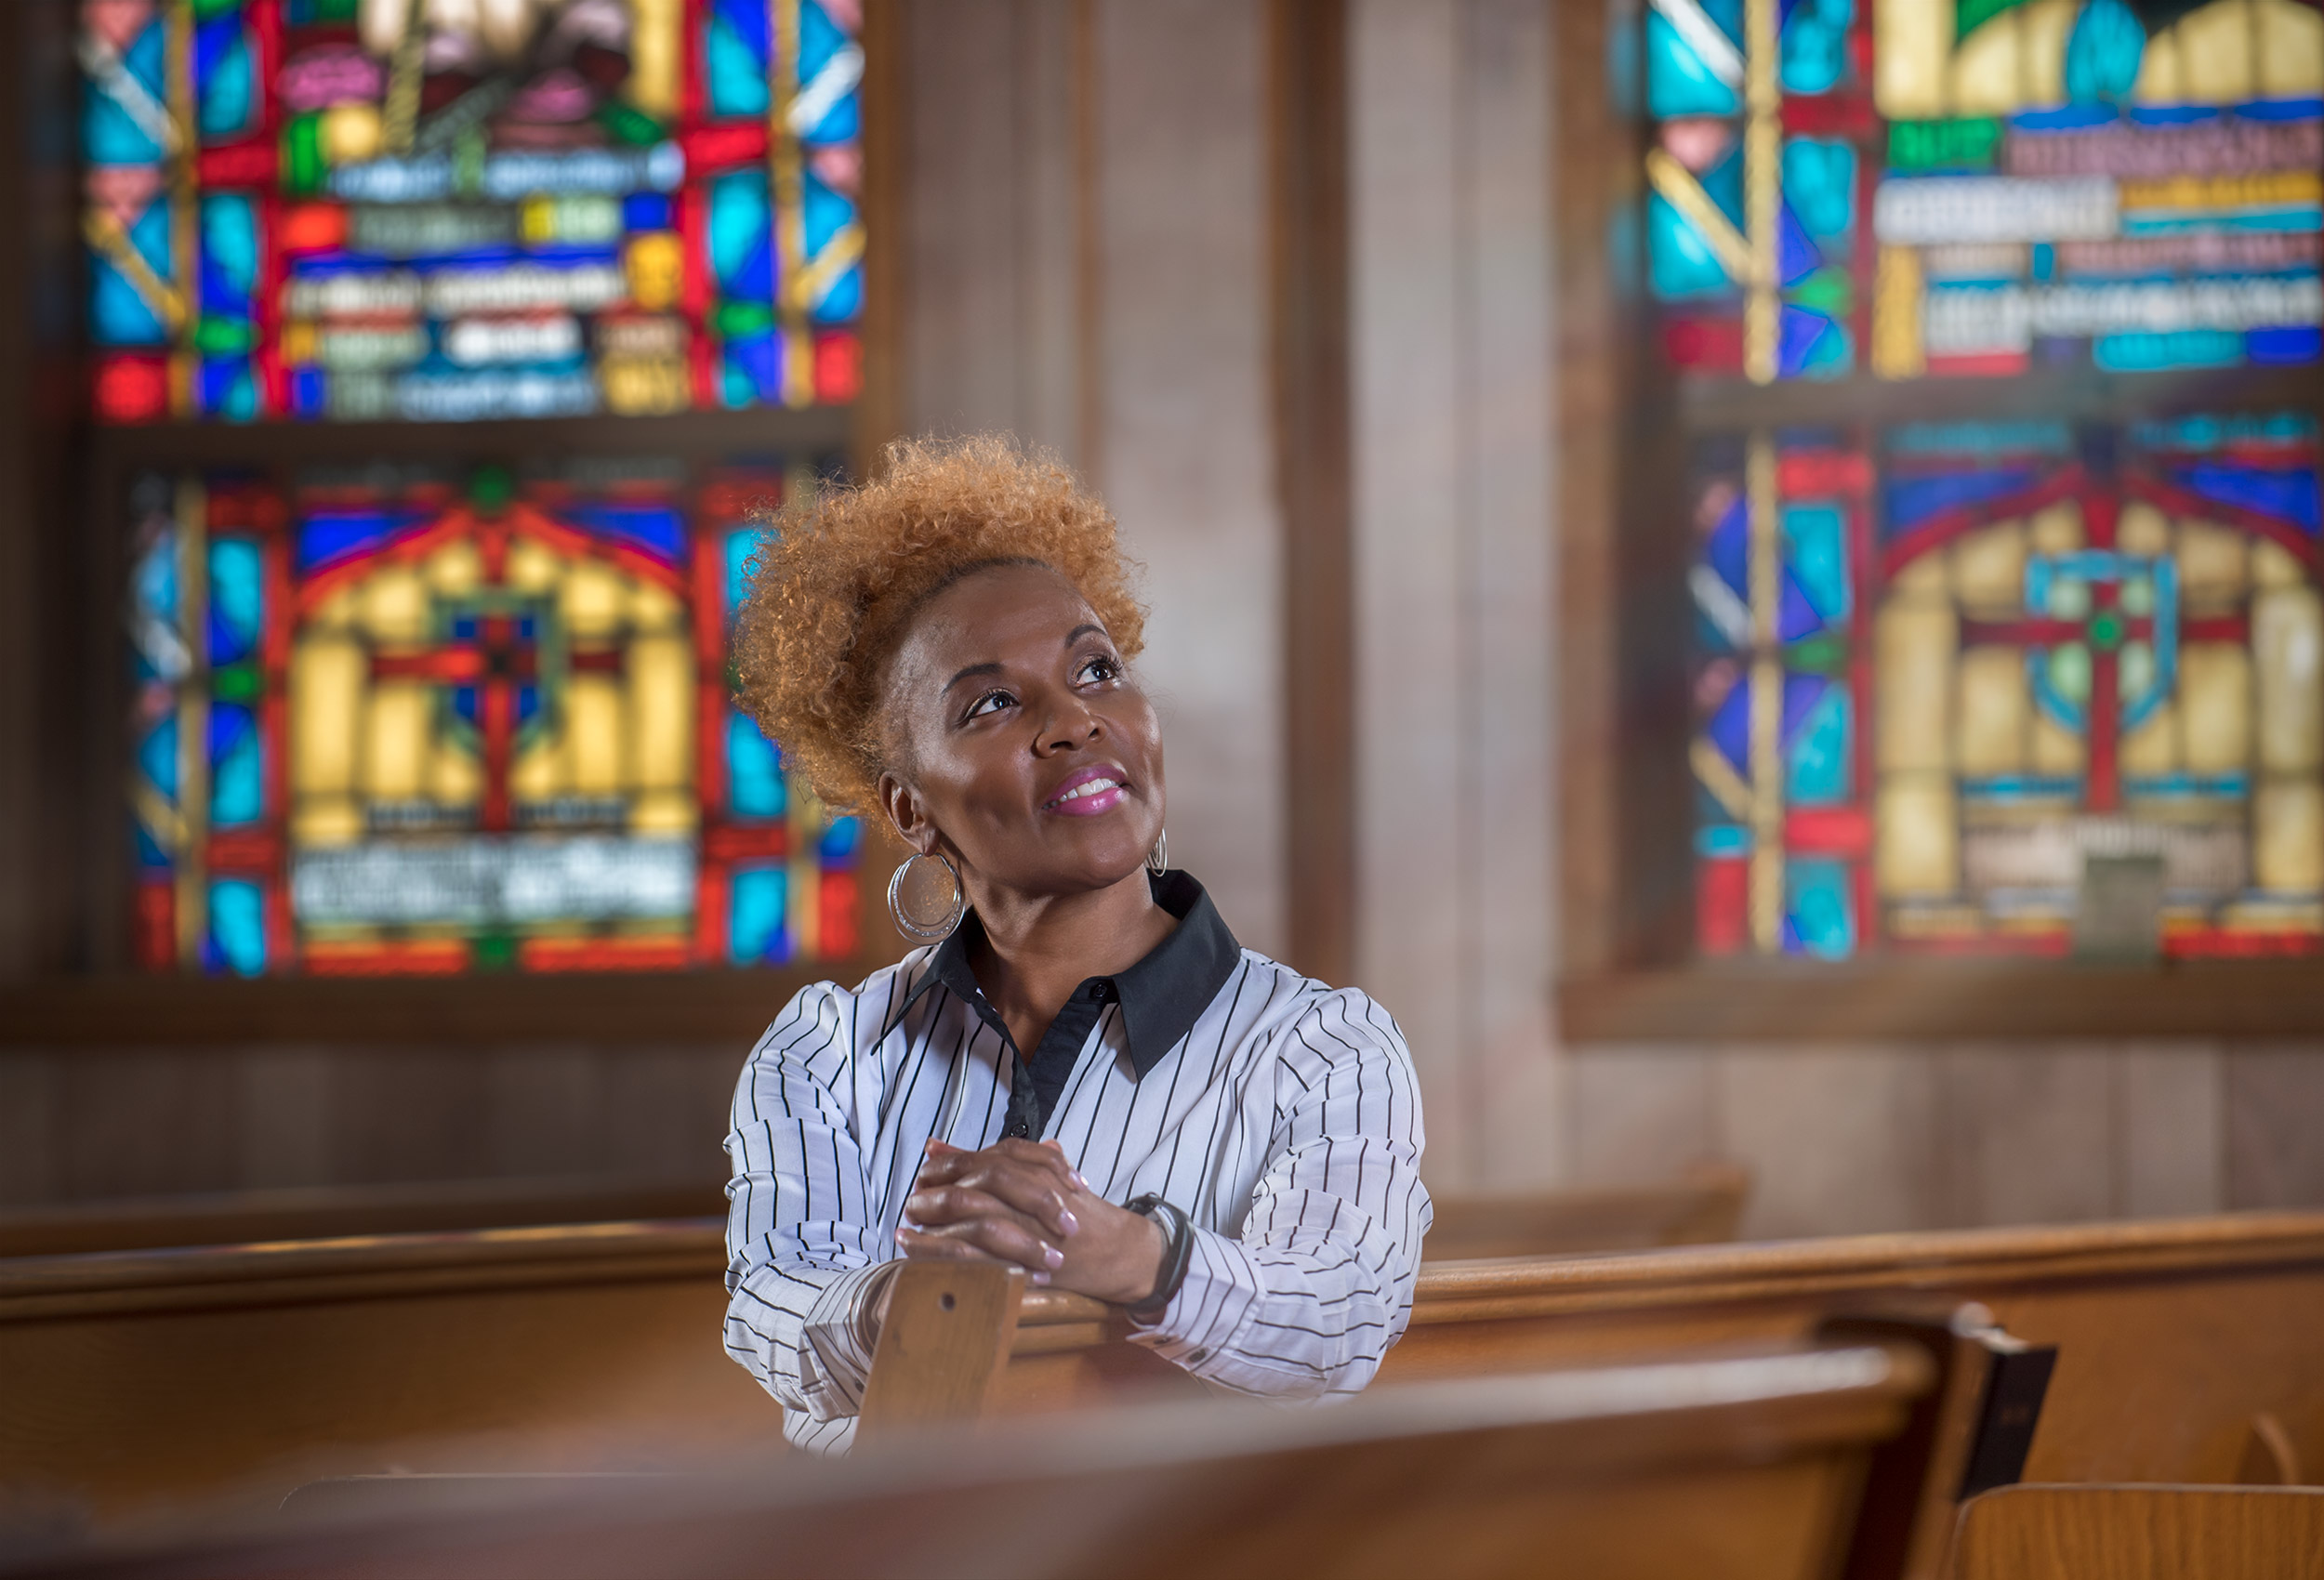 Prayerful woman sits in church pews with stained glass windows